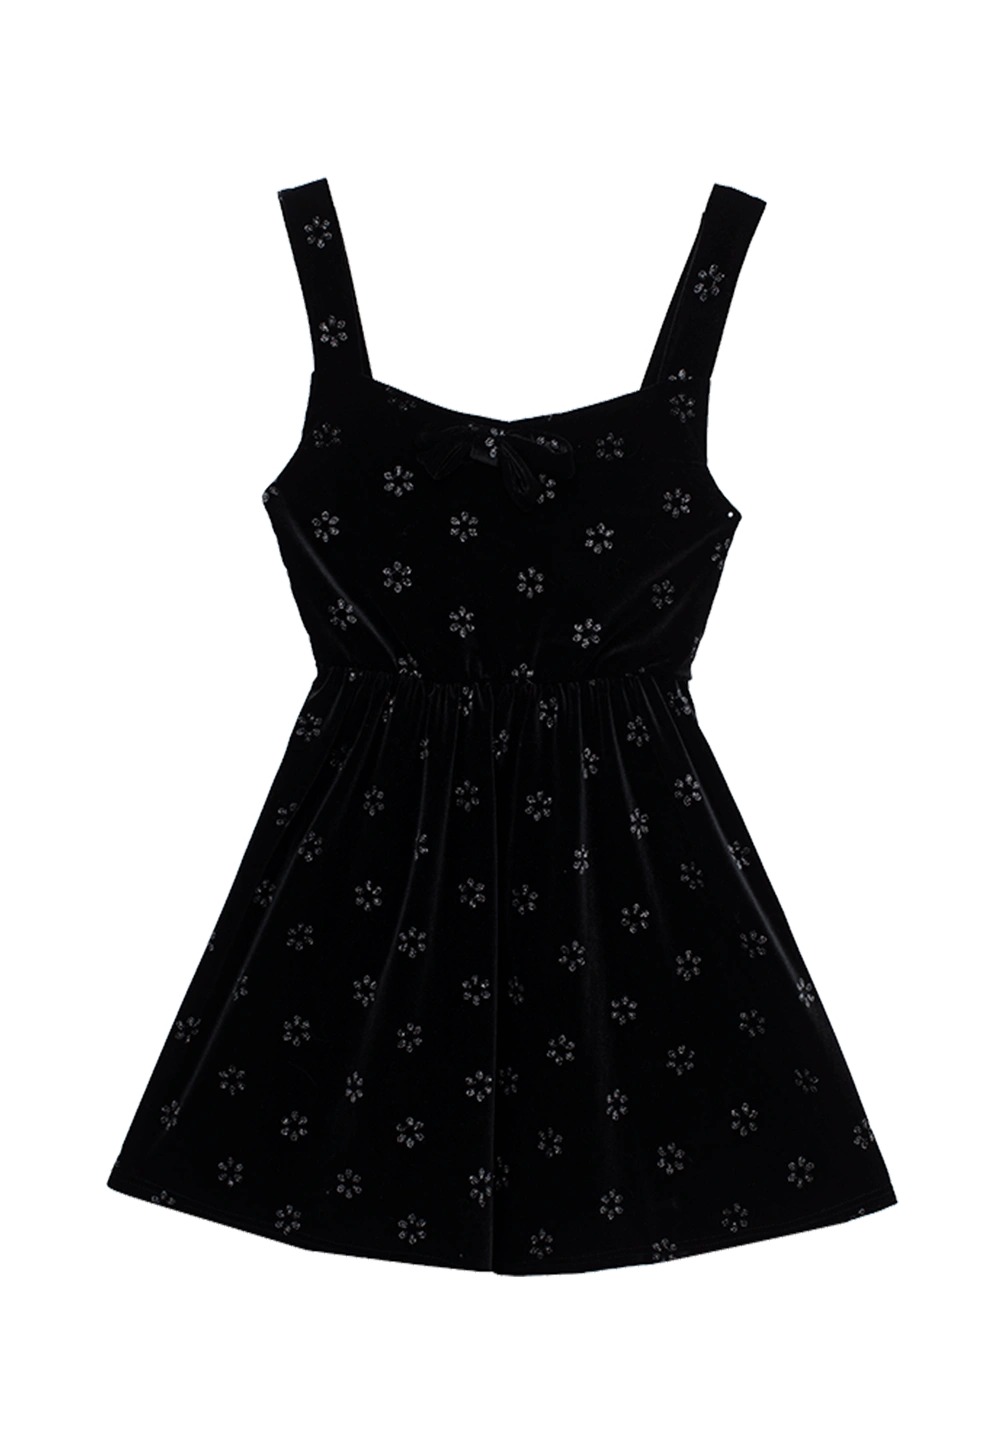 Women's Black Floral Sleeveless Dress with Bow Detail